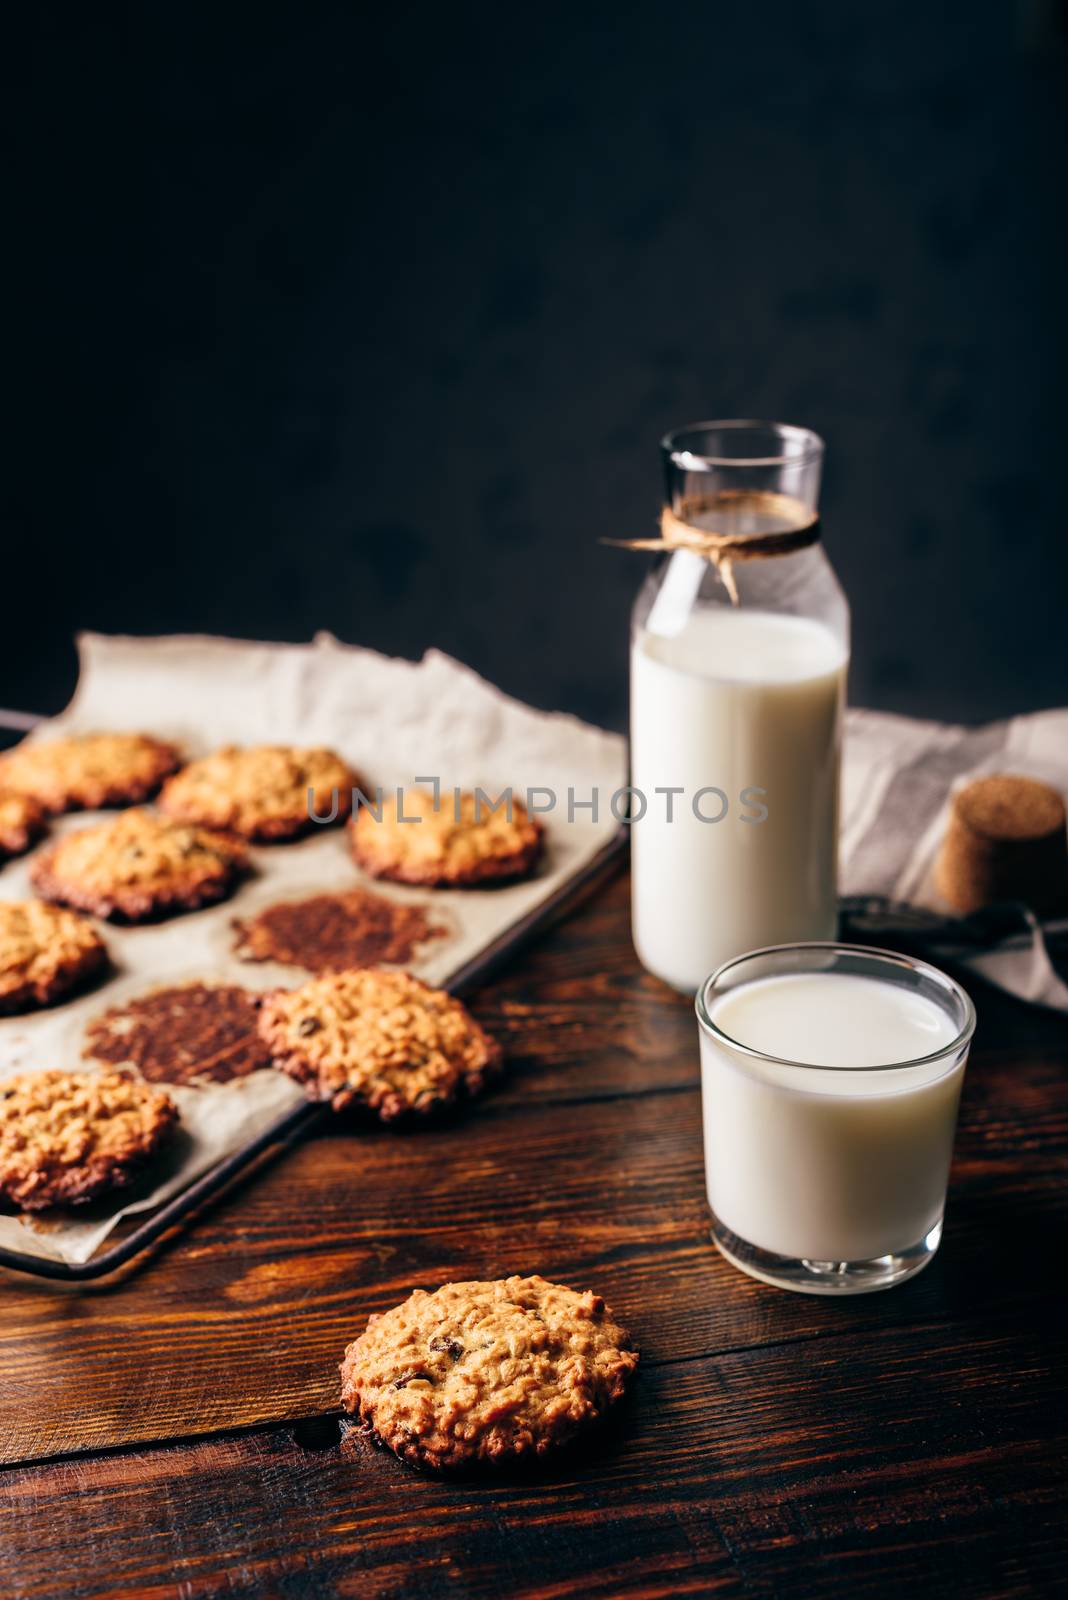 Oatmeal Cookies and Glass of Milk. by Seva_blsv